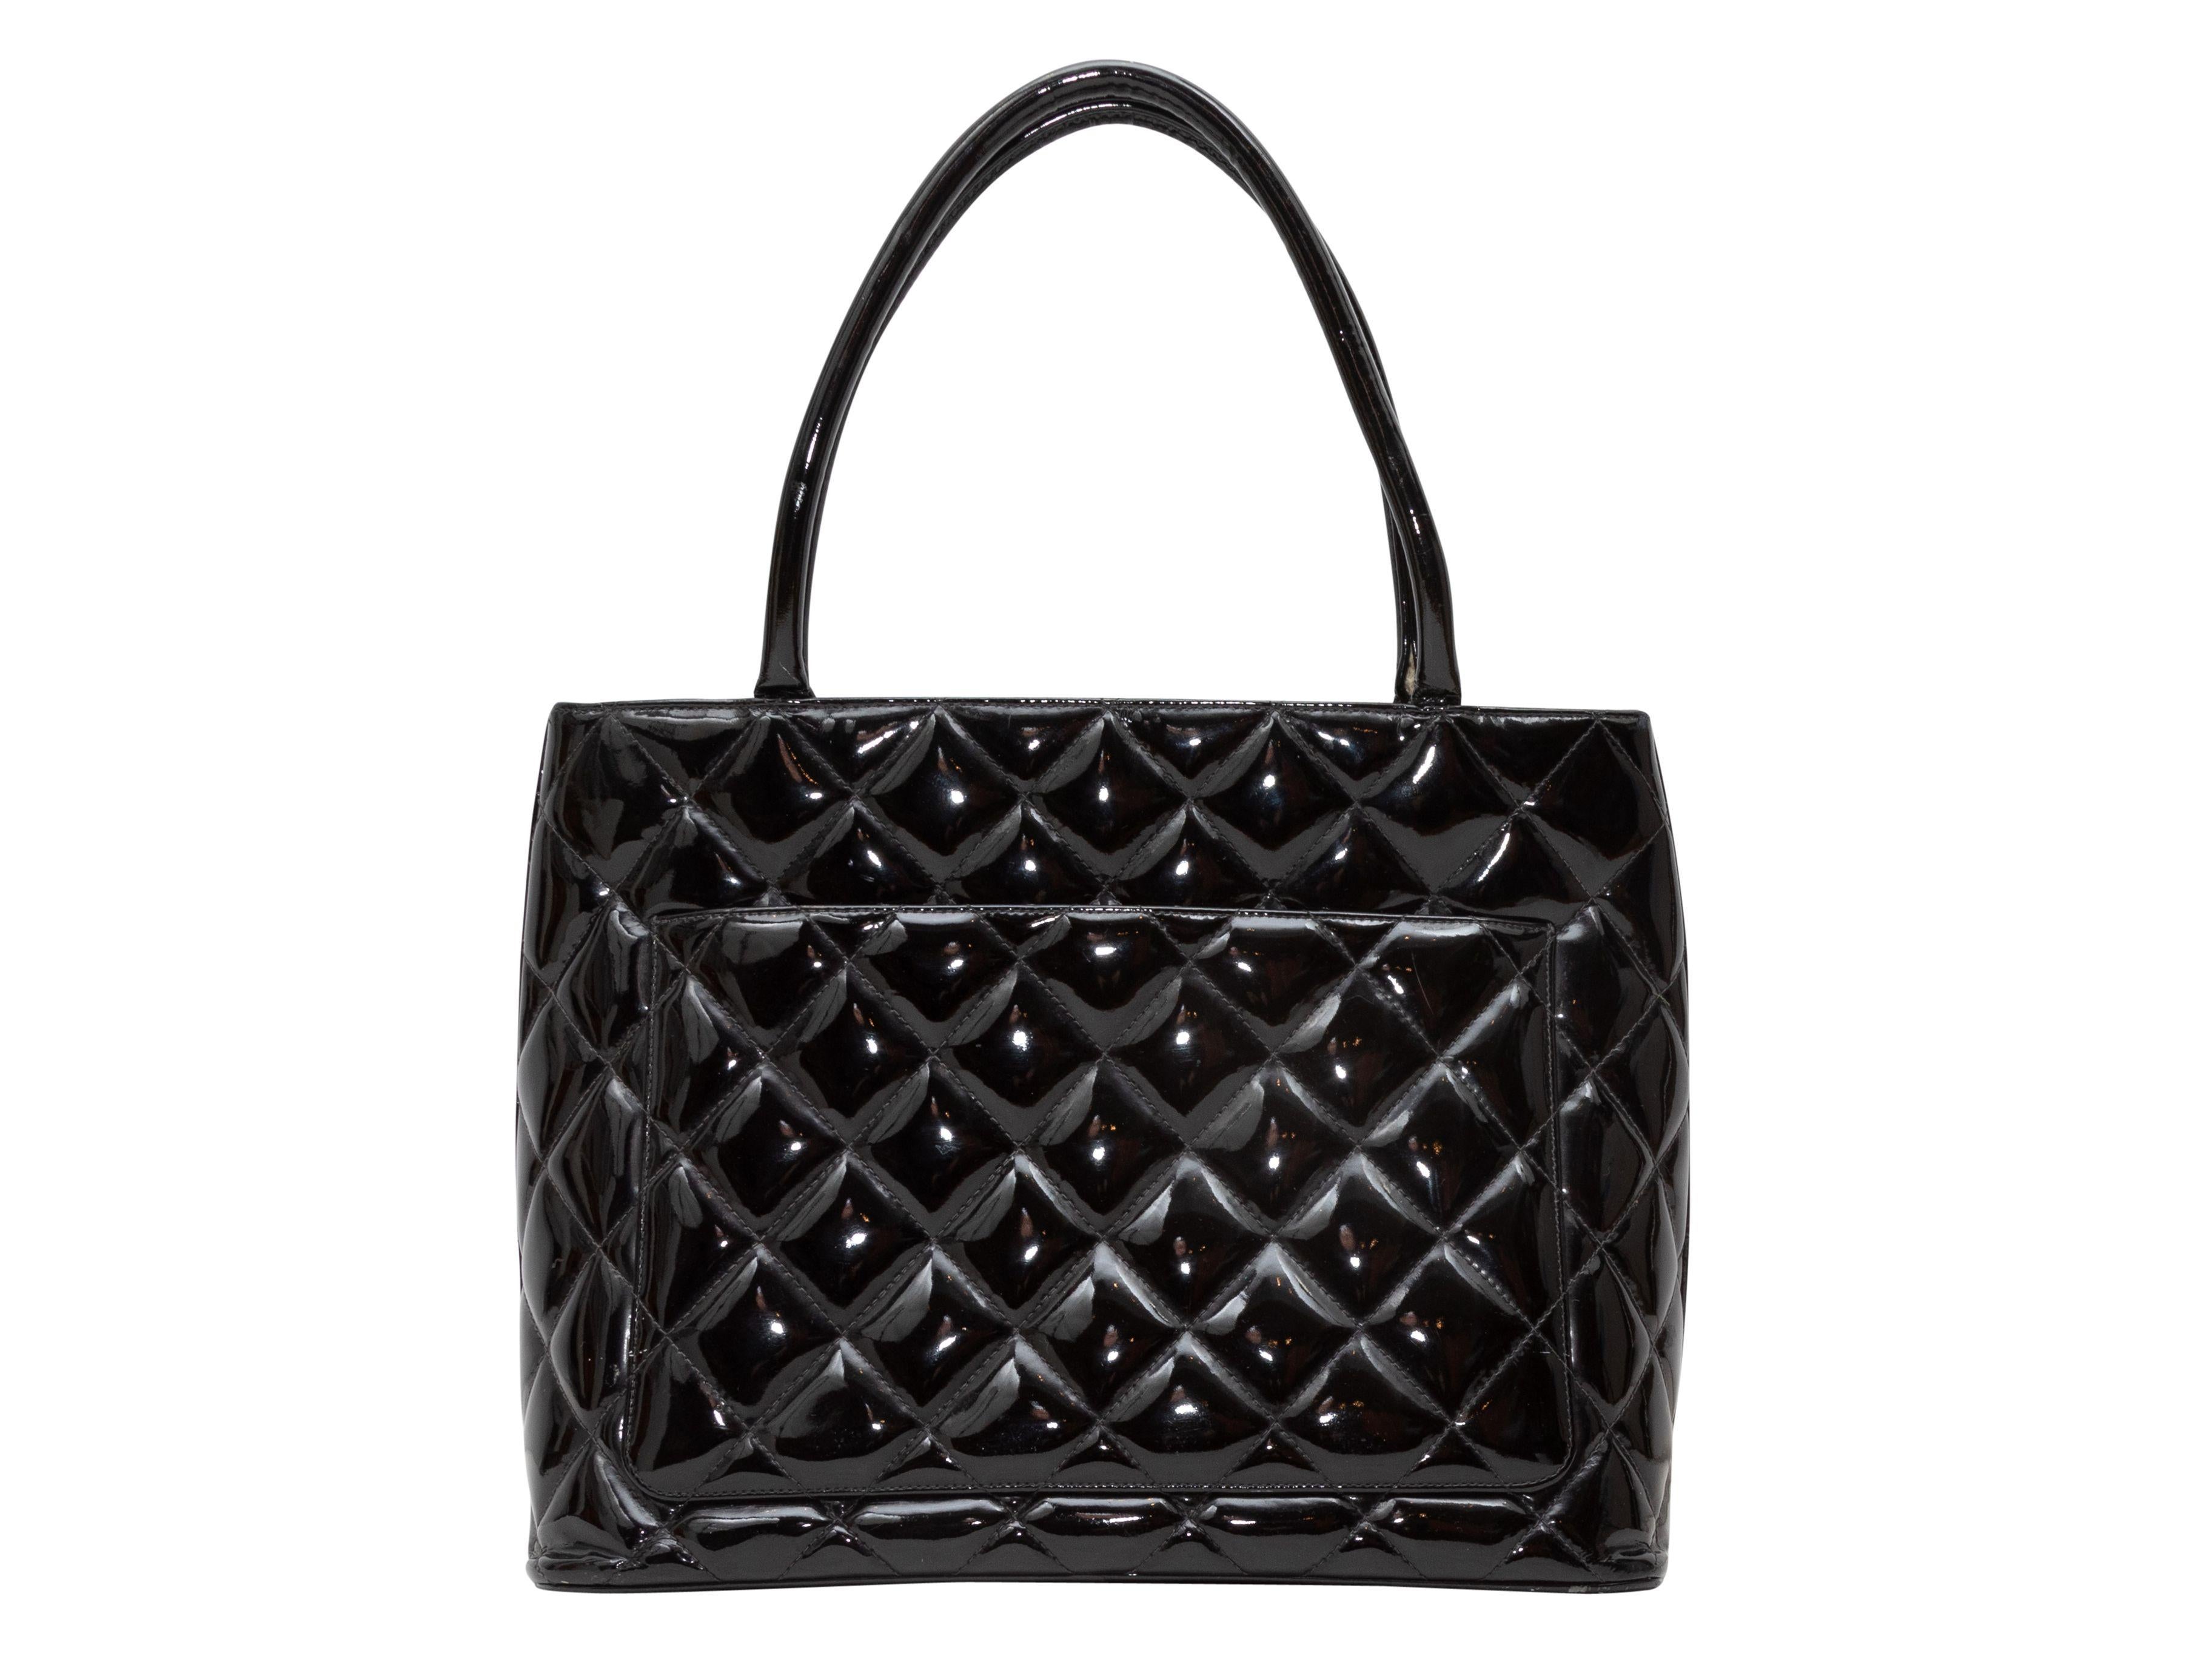 Chanel Black Quilted Patent Leather Tote Bag 4